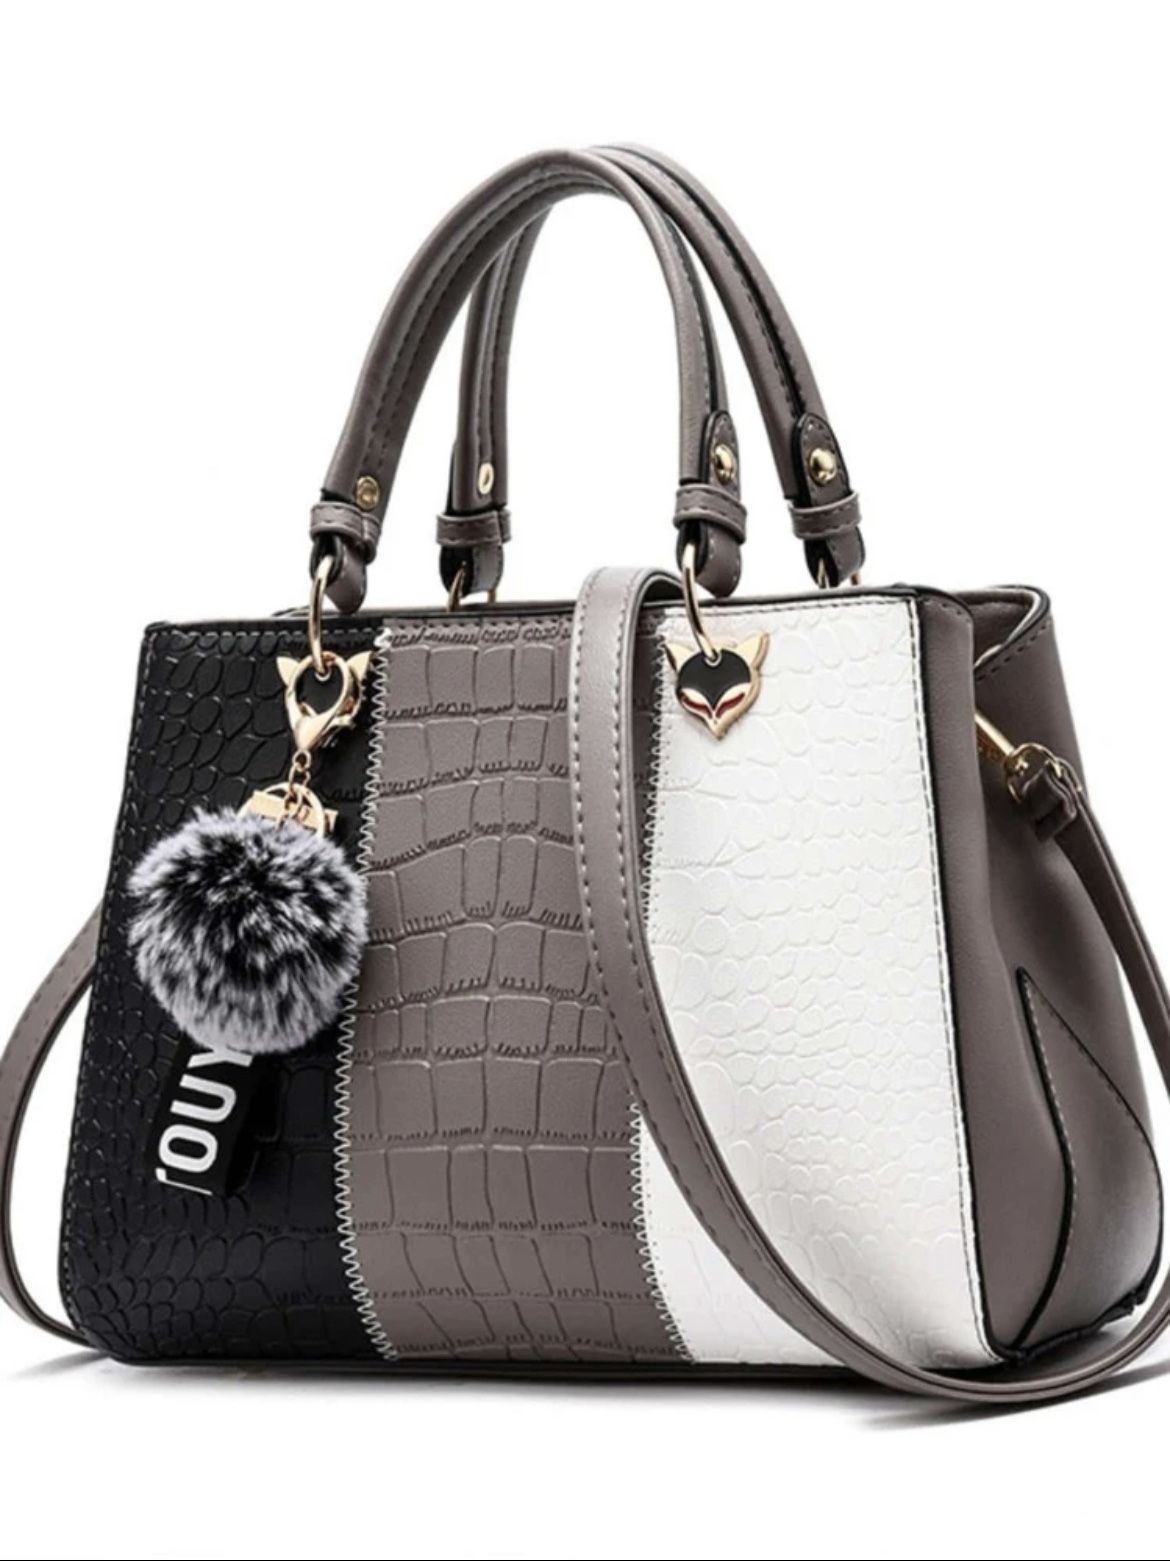 Fashionable Square Bag Color Block Crocodile Embossed Pom Pom Charm Pu, Elevate Your Style With This Trendy Handbag - Perfect For The Office & Party B